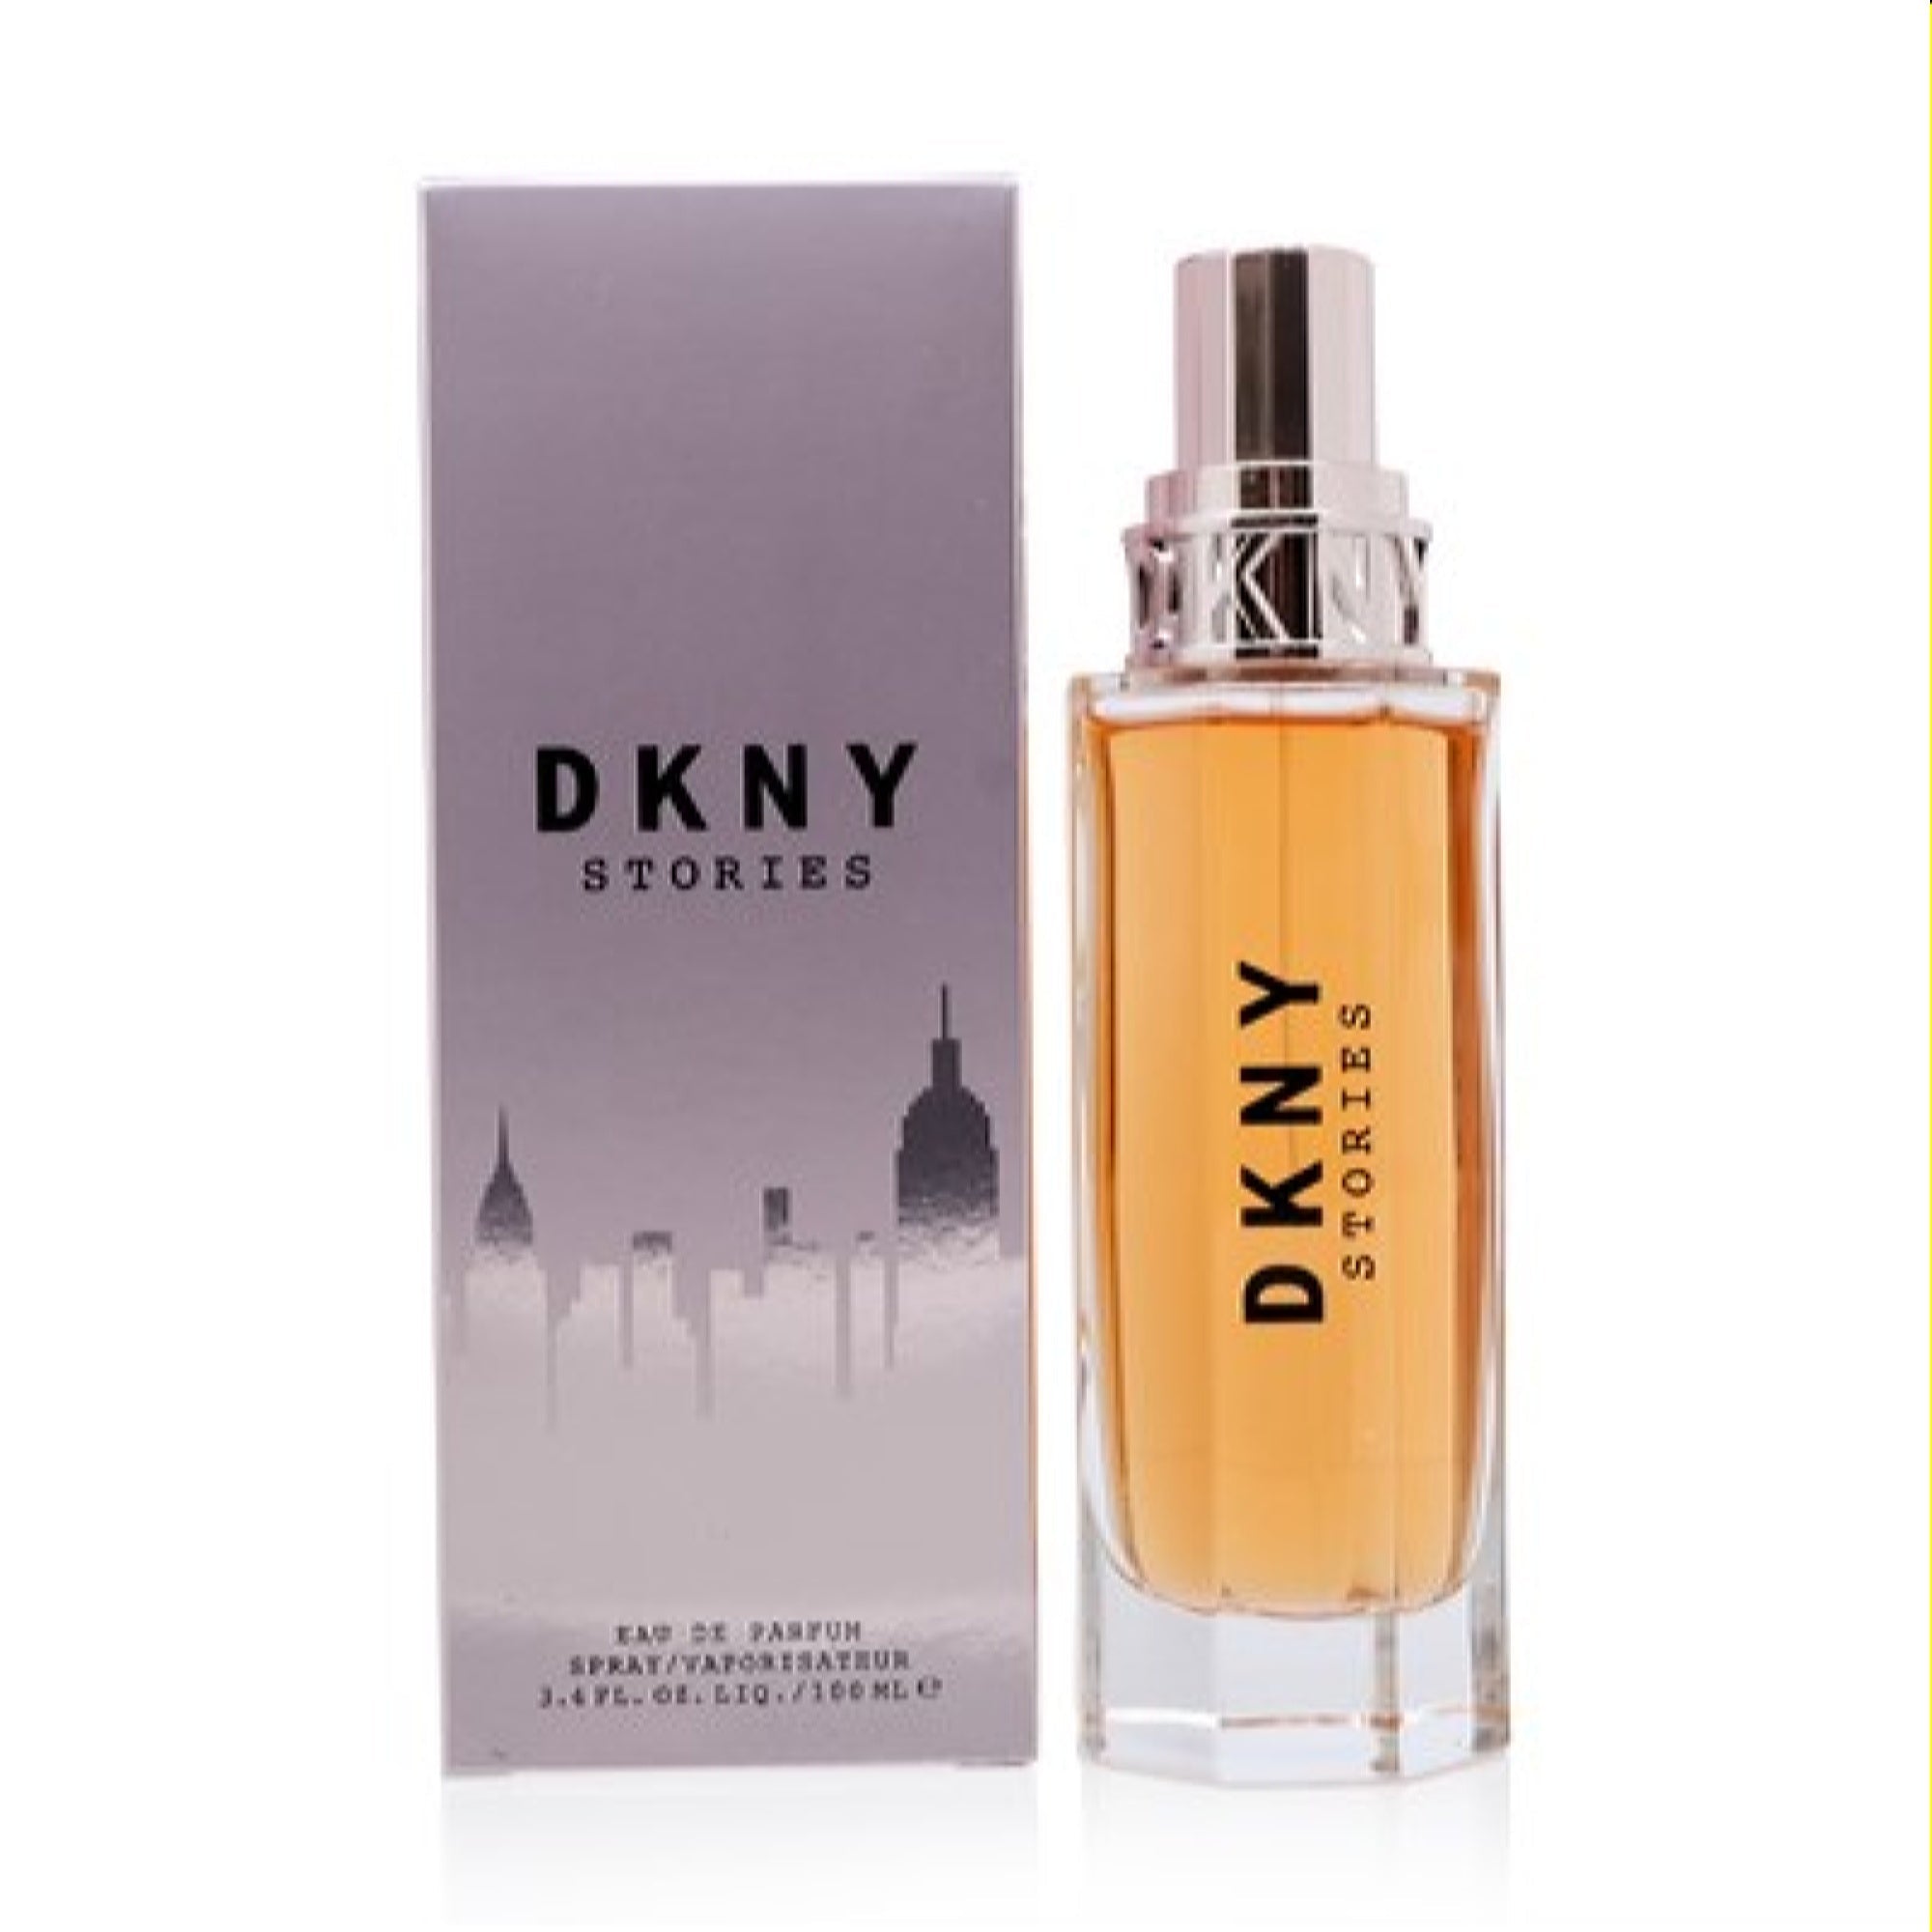 DKNY Energizing by Donna Karan 3.4 oz EDP Perfume for Women New In Box